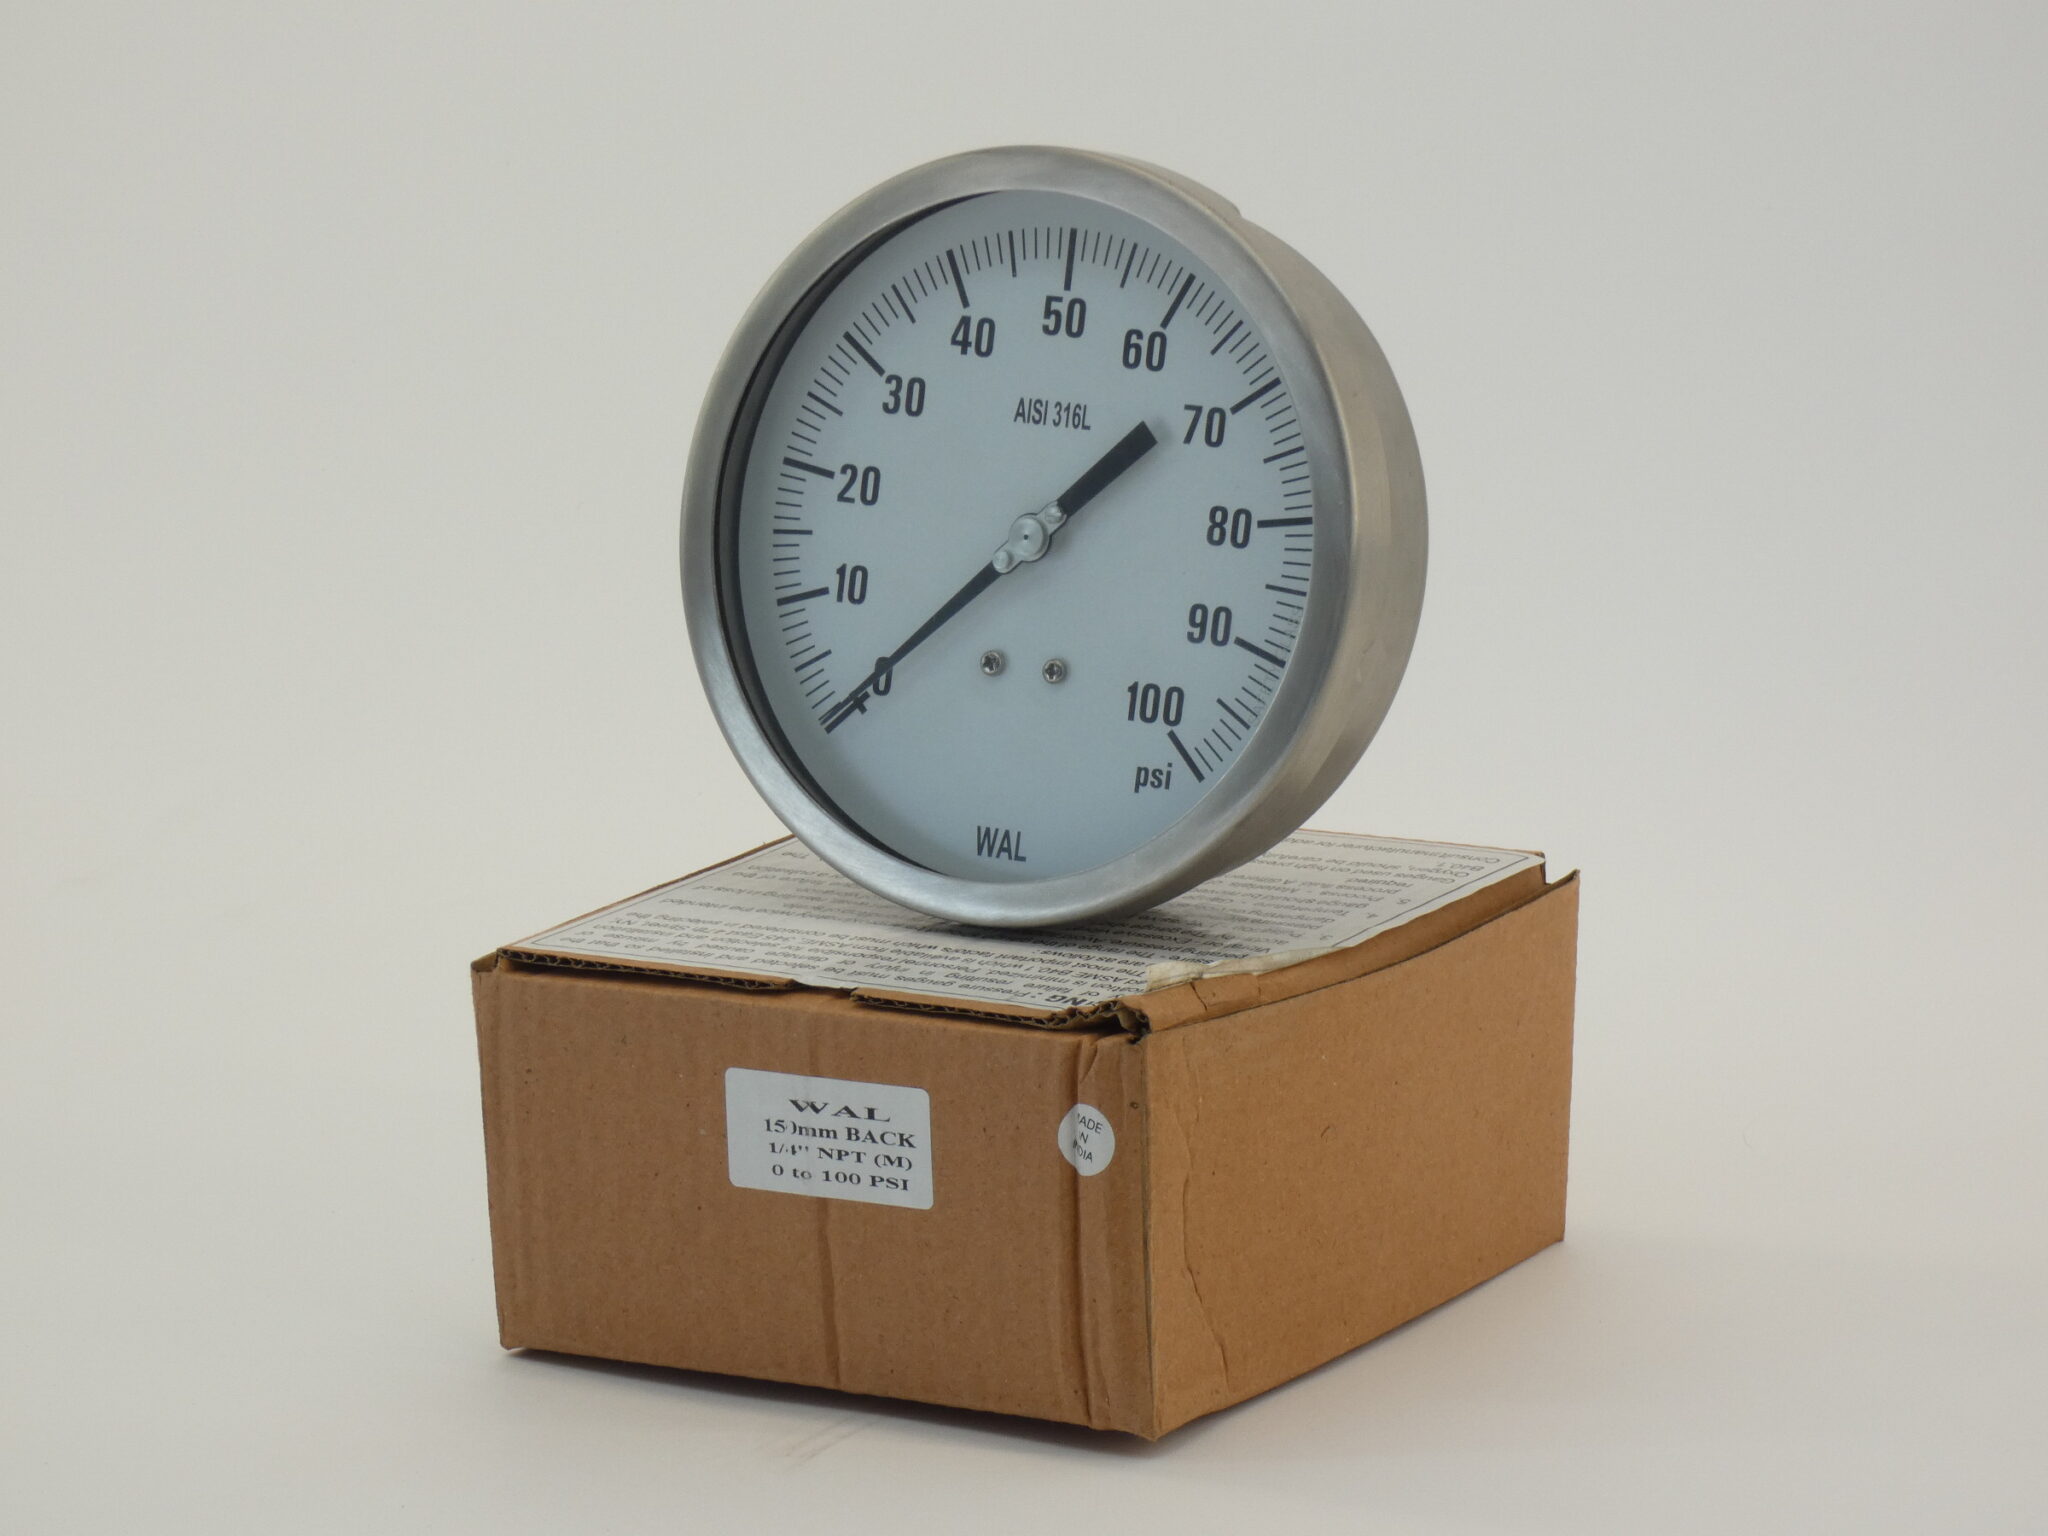 Wal-Rich General Pressure Gauge #1712508 2.5" 0-100 psi 1/4" NPT LM New in Box 